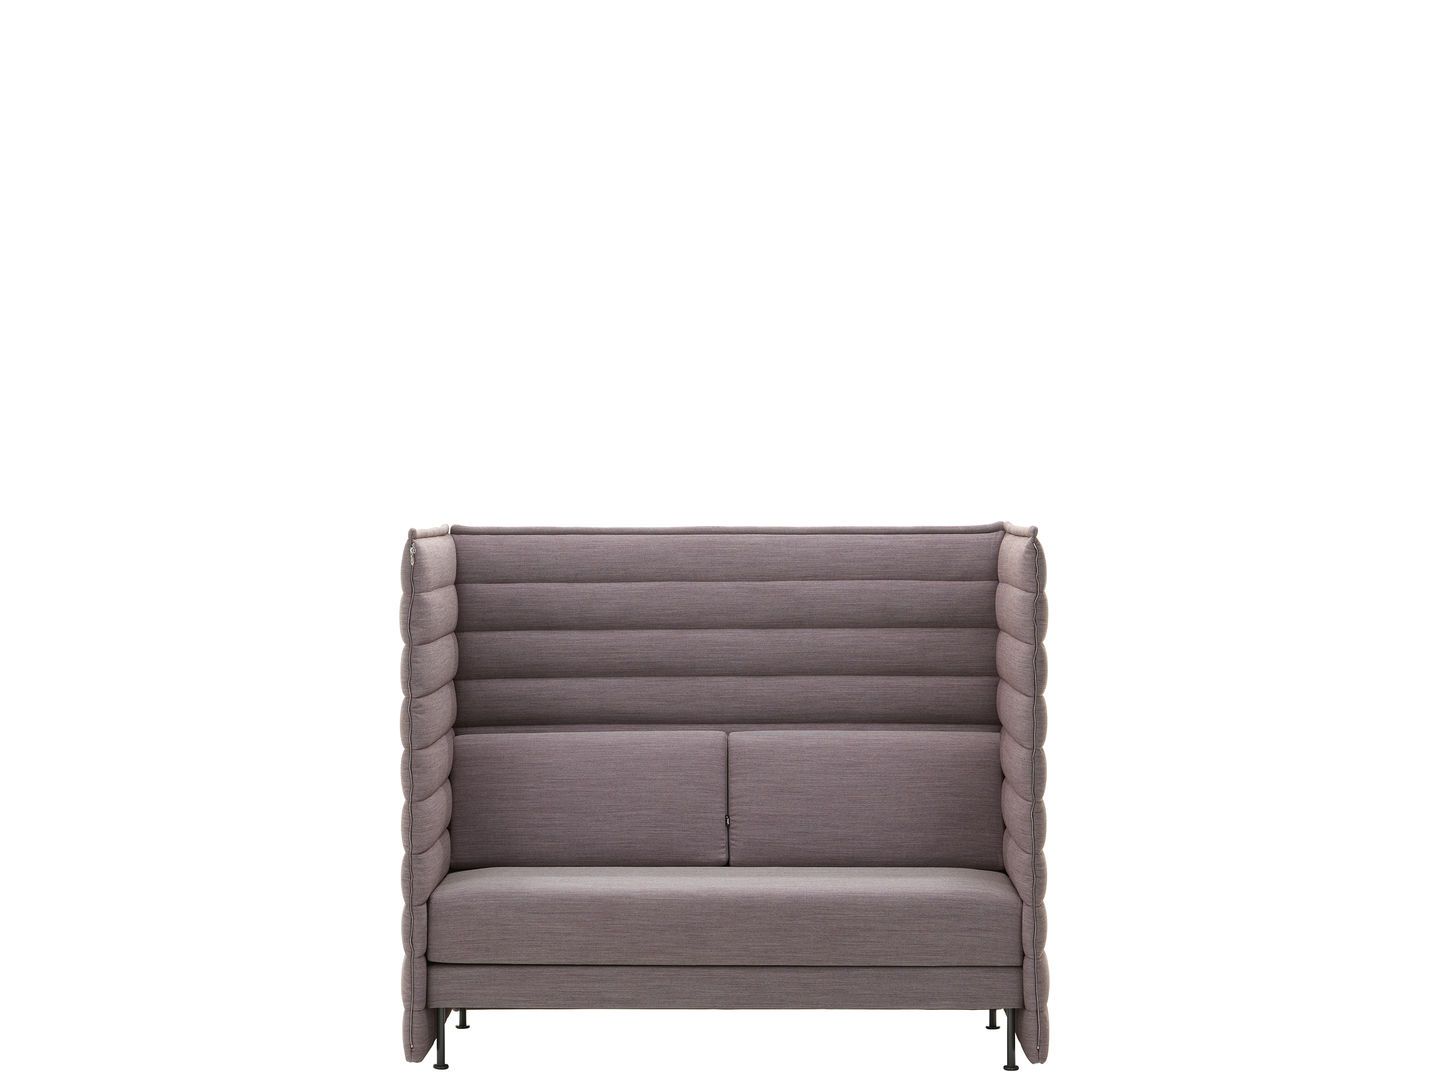 Vitra Alcove Plus Sofa from One52 Furniture

2Modern Alcove Plus Sofa from Vitra, available at One52 Furniture

3Vitra Alcove Plus Sofa, perfect for any modern living space from One52 Furniture